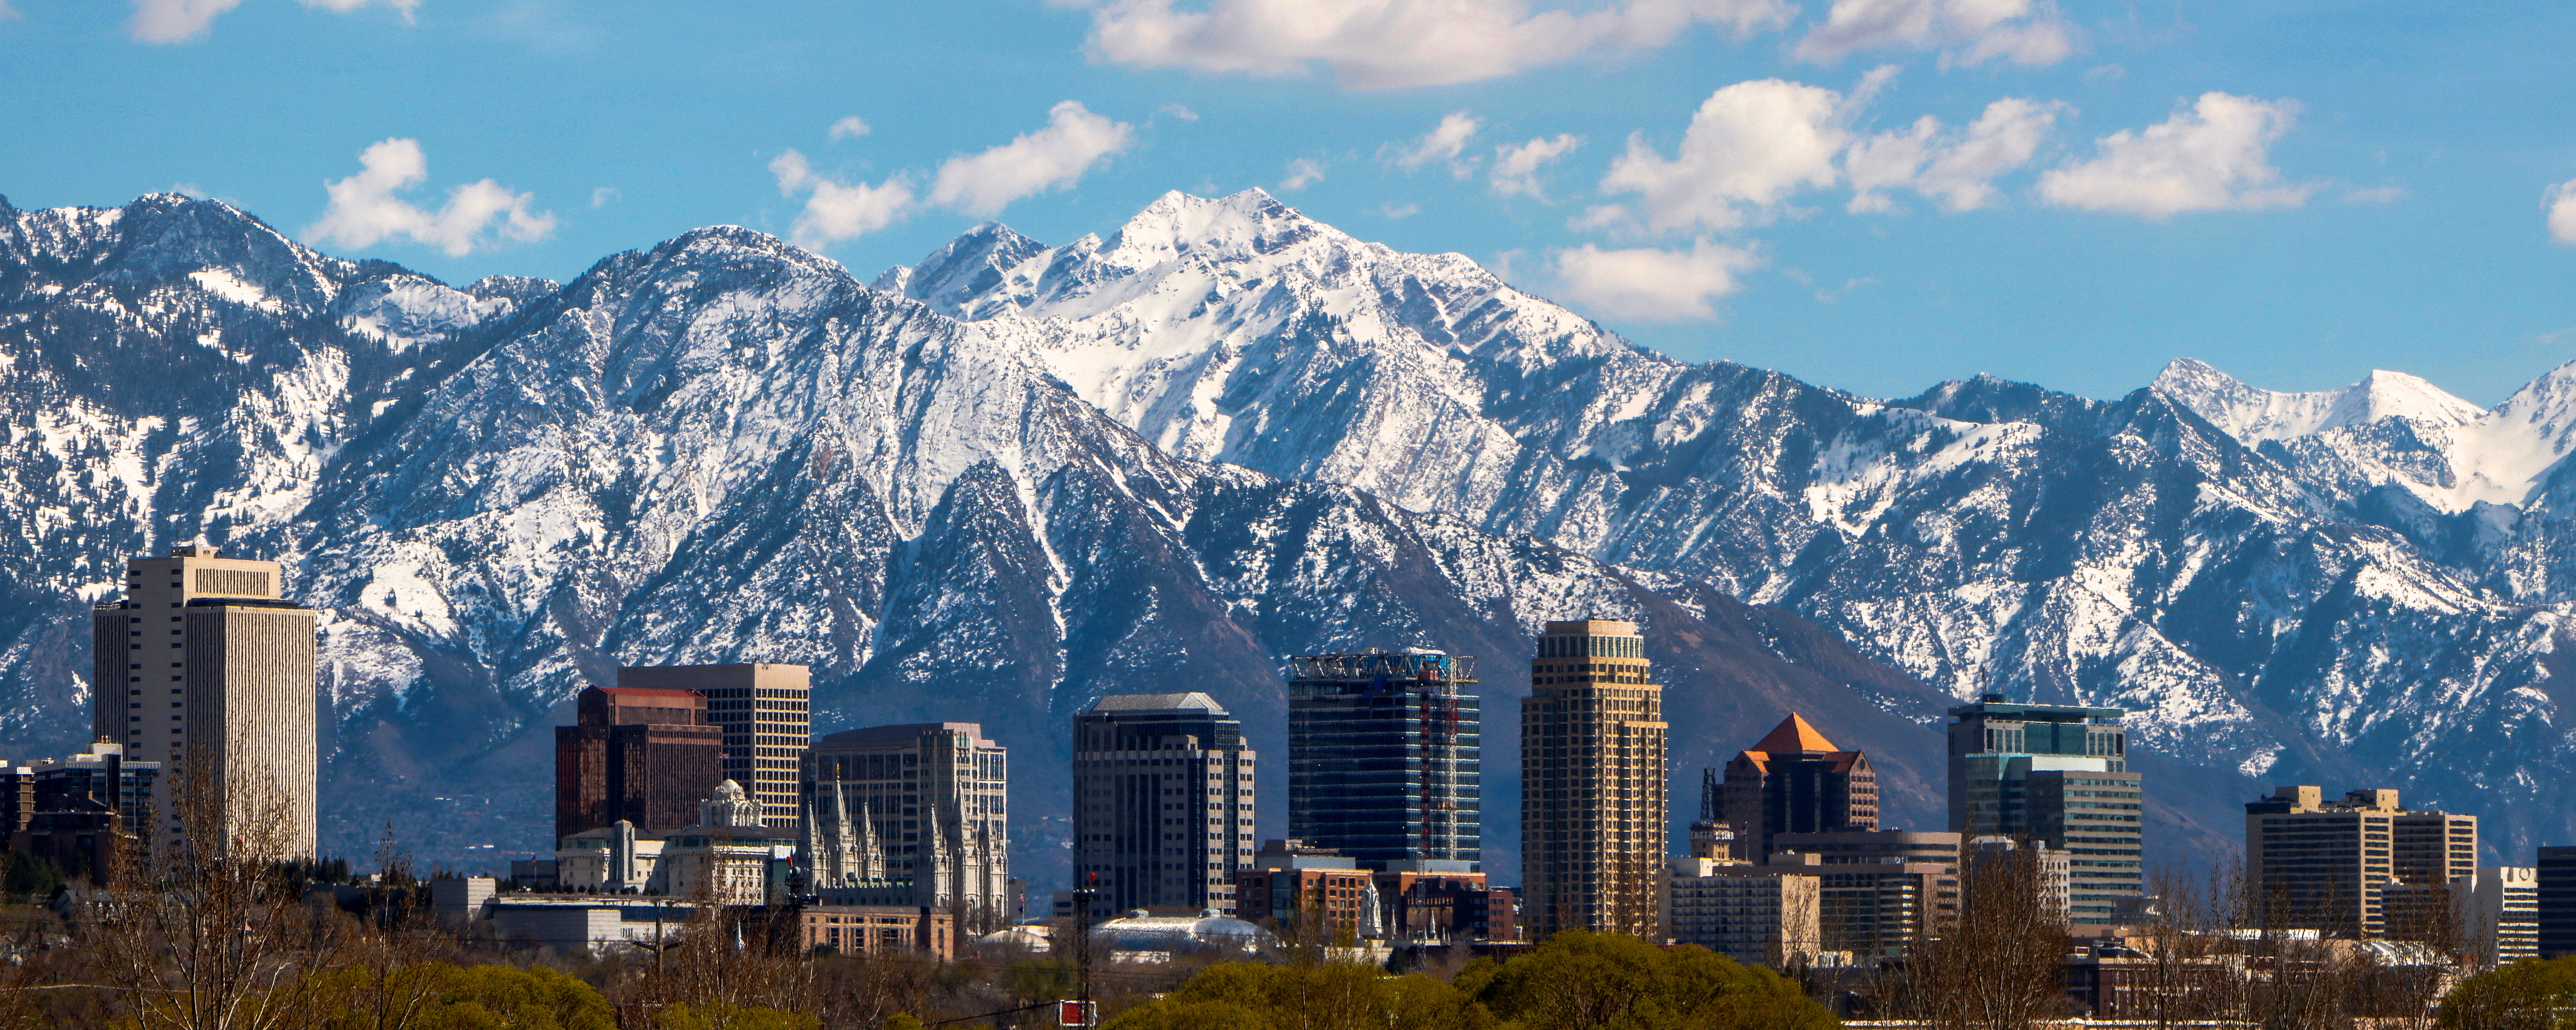 Salt Lake City Utah with mountains in background